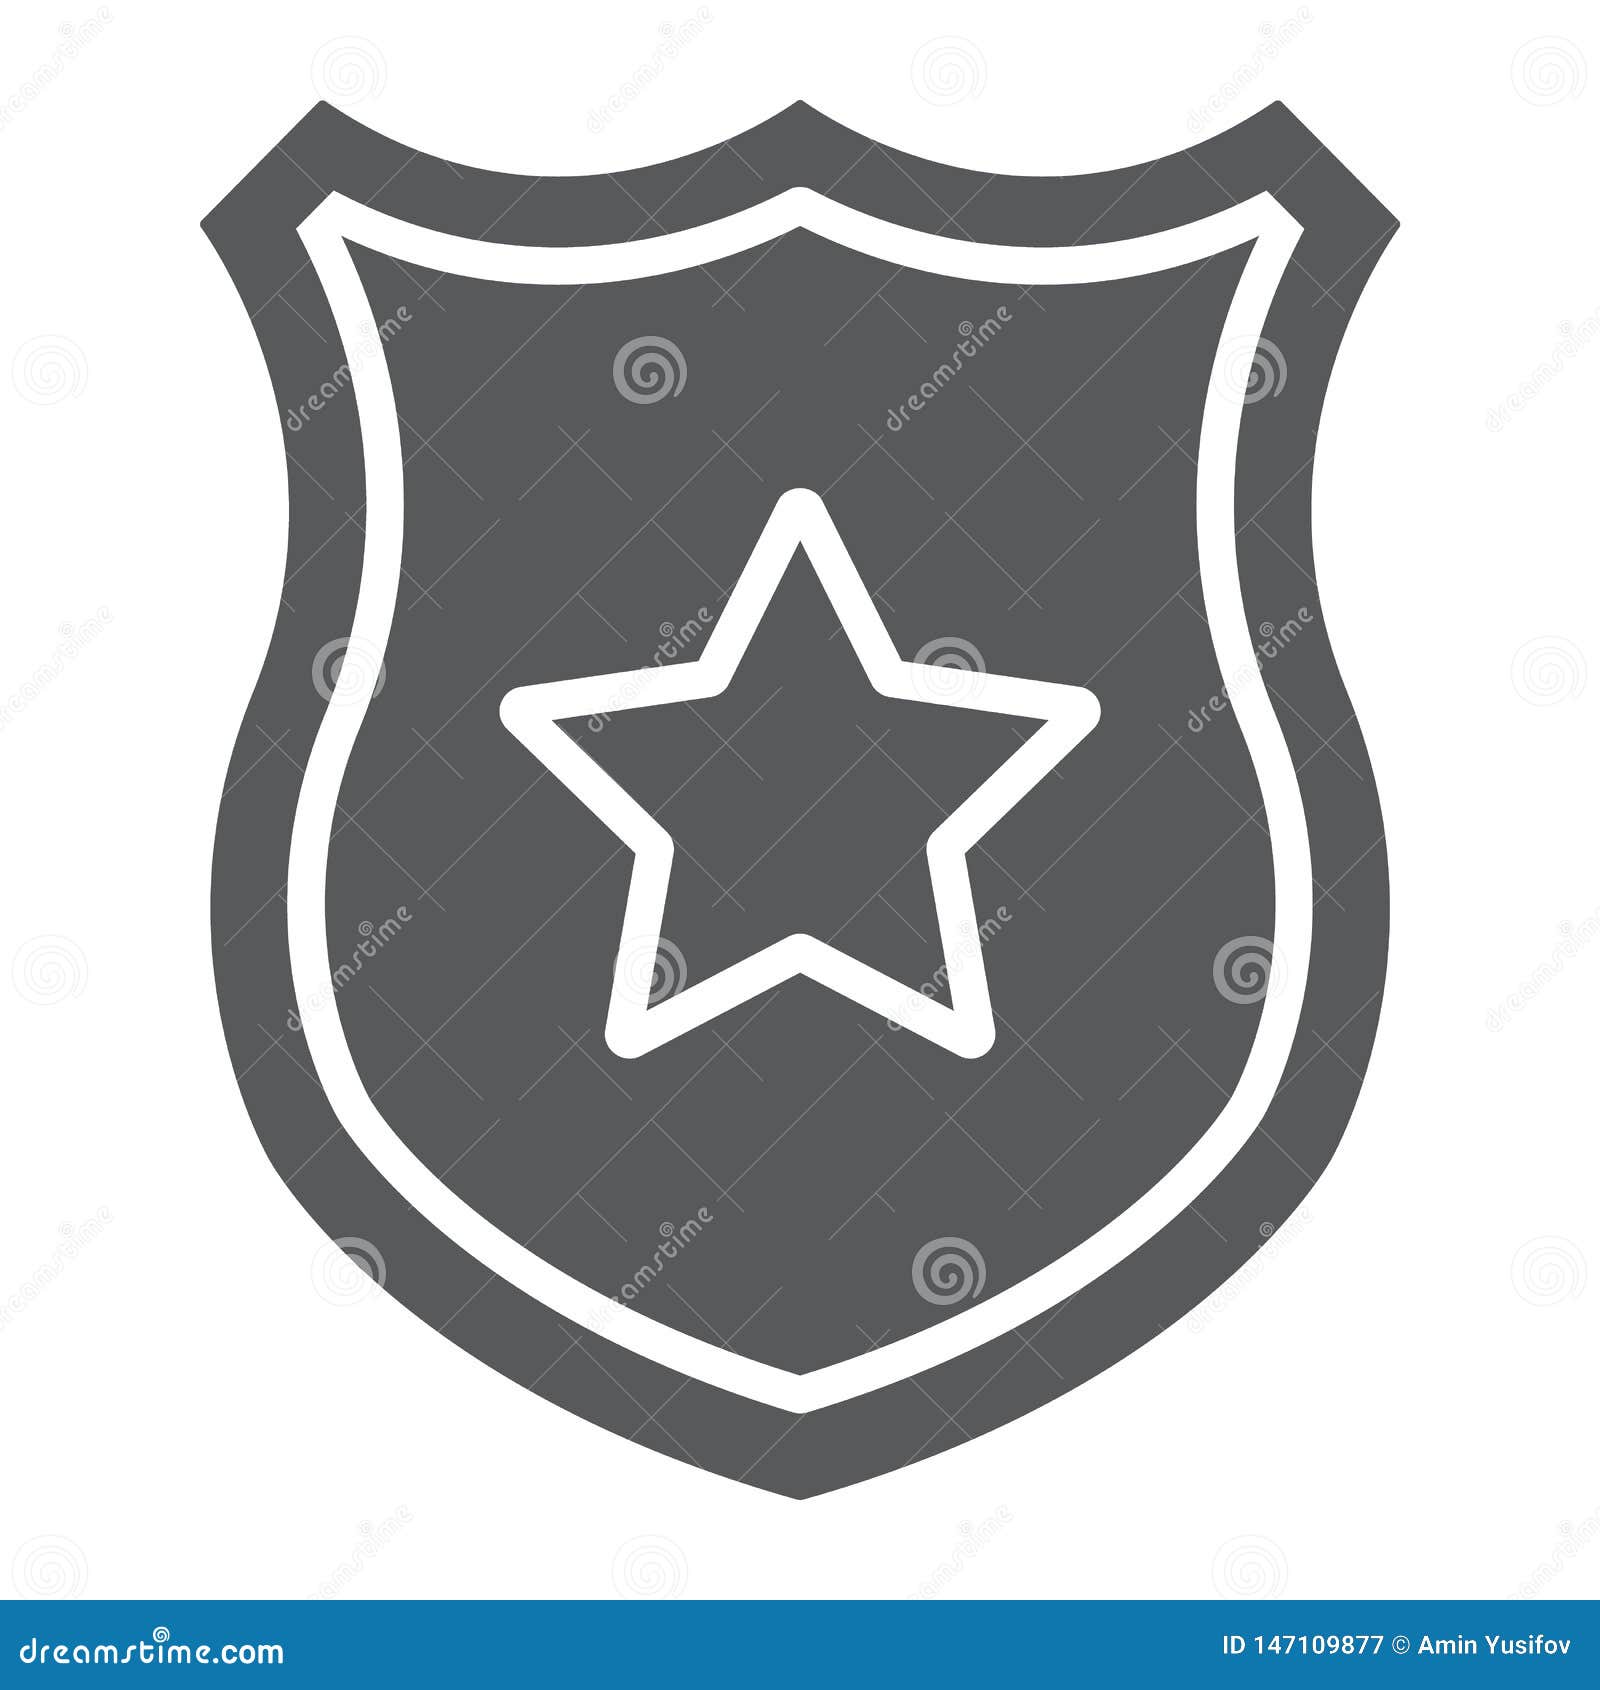 police badge glyph icon, officer and law, shield with star sign,  graphics, a solid pattern on a white background.